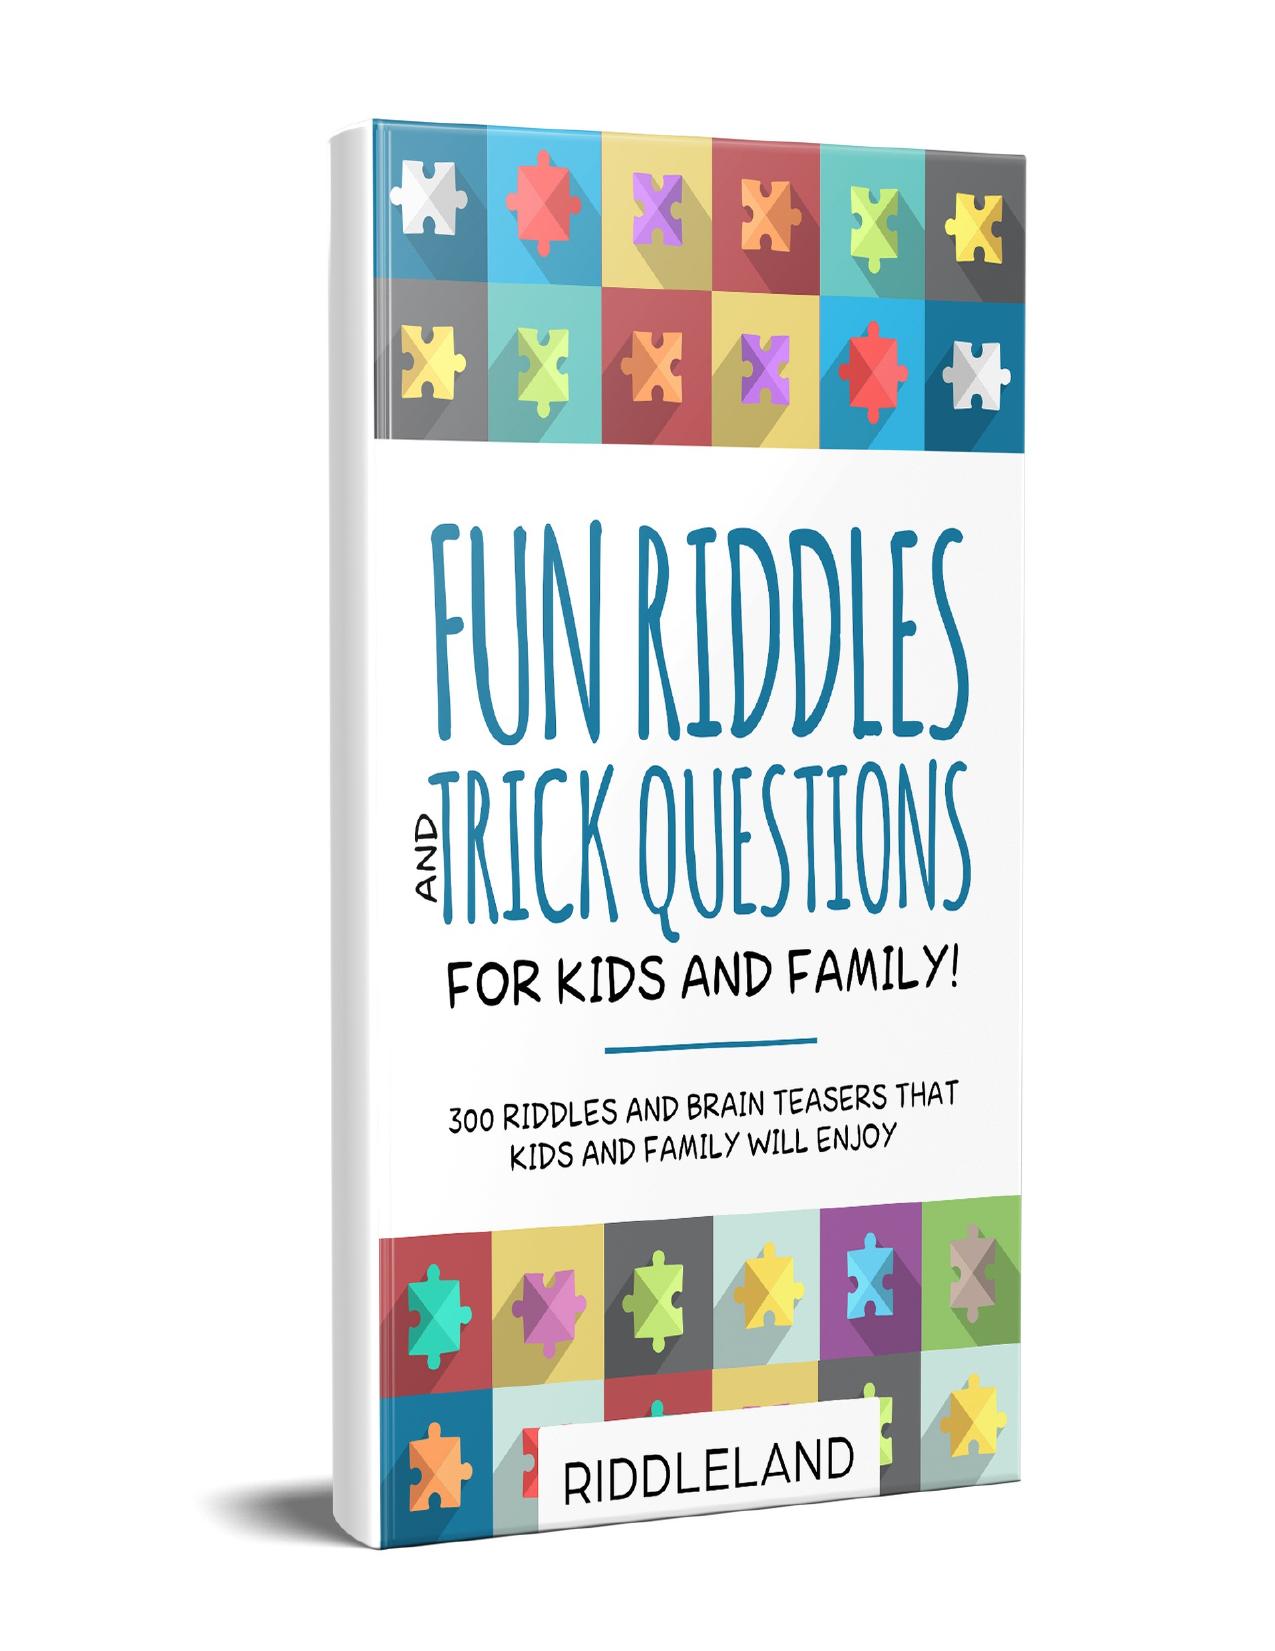 Fun Riddles & Trick Questions For Kids and Family: 300 Riddles and Brain Teasers That Kids and Family Will Enjoy - Age 7-9 8-12 by Riddleland